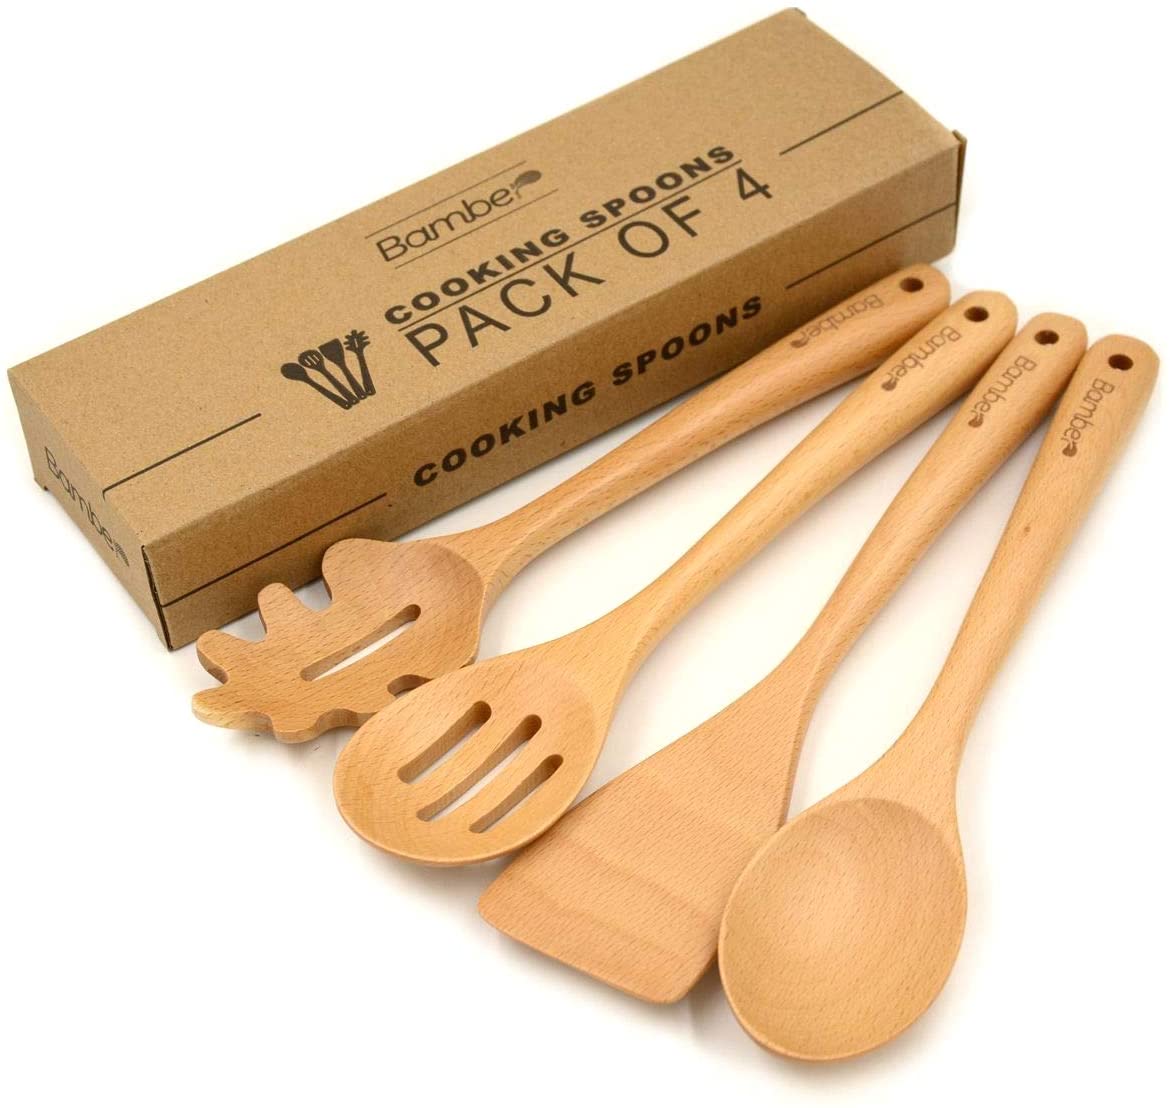 Bamber Cooking Utensil Wooden Spoons, 4-Piece